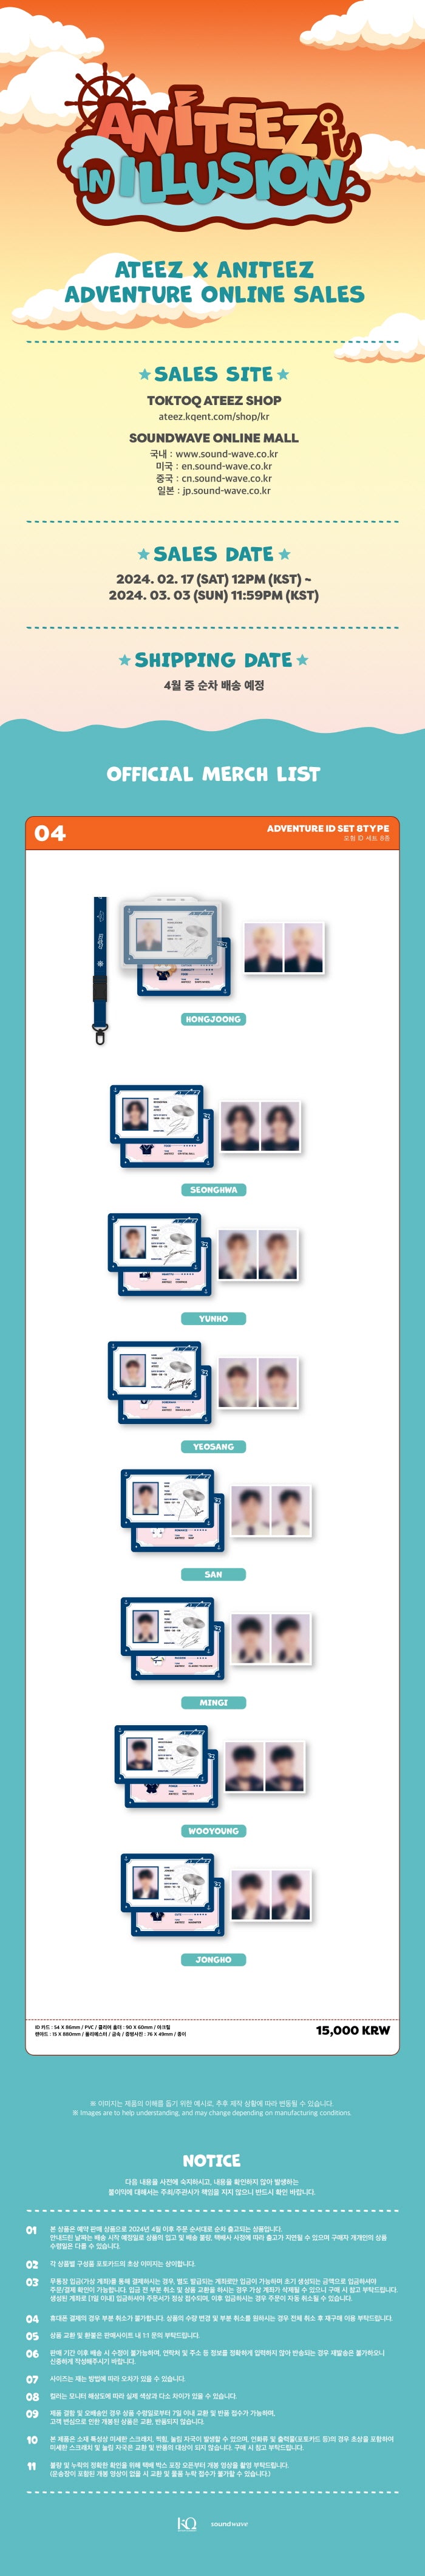 ATEEZ - ANITEEZ IN ILLUSION OFFICIAL MD ADVENTURE ID SET Infographic